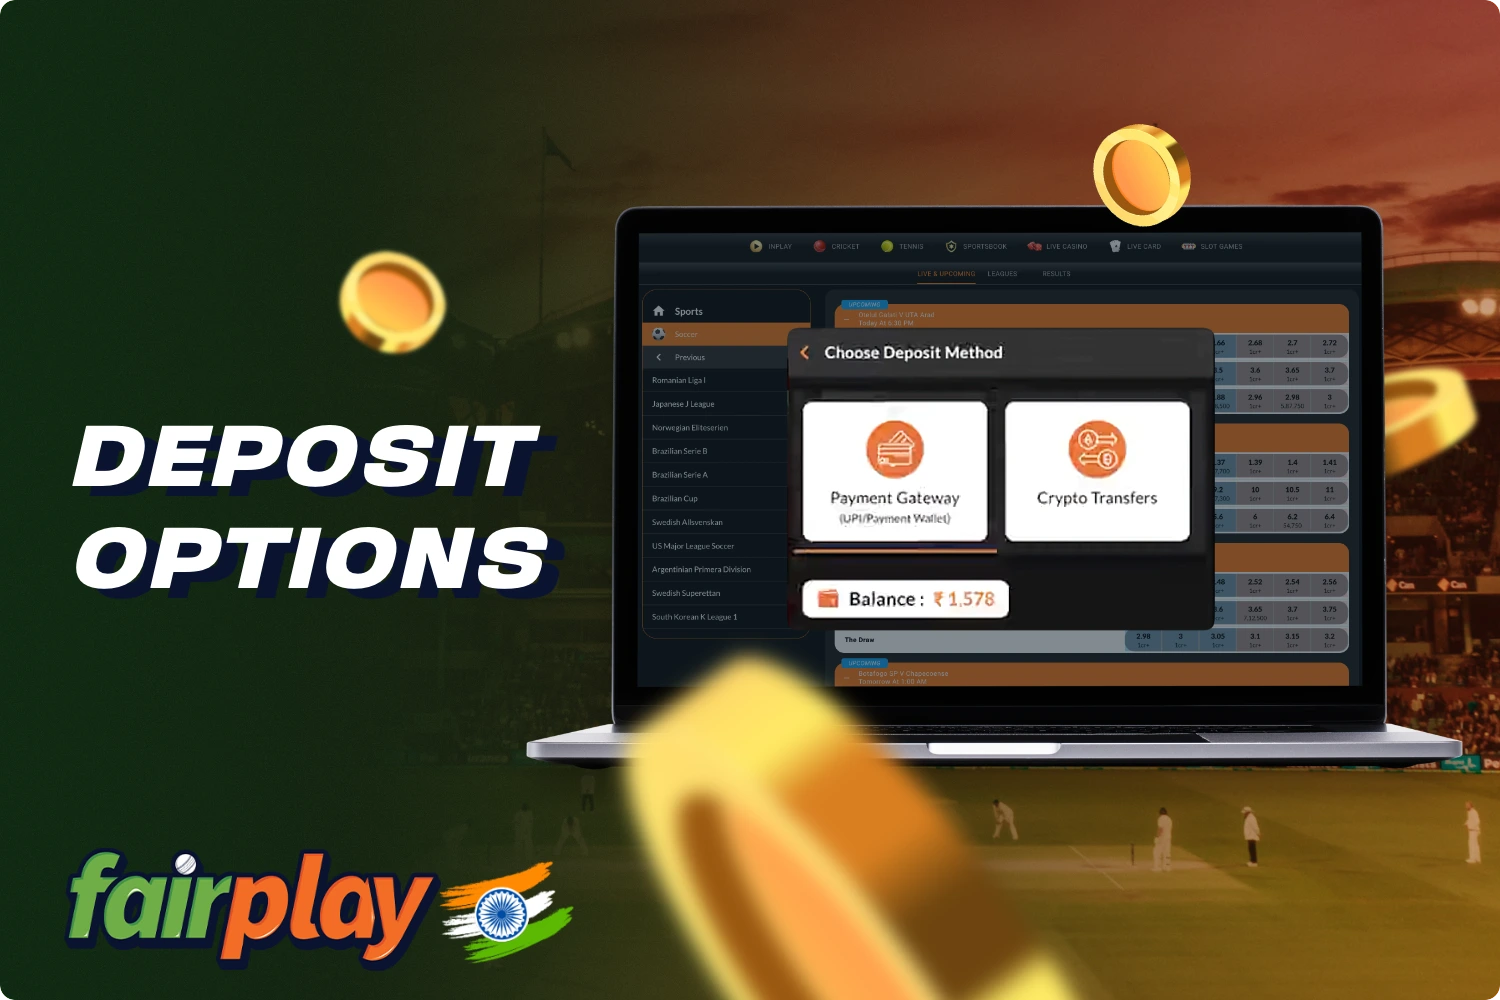 Make a deposit to your Fairplay account balance to bet on sports and play casino games for real money